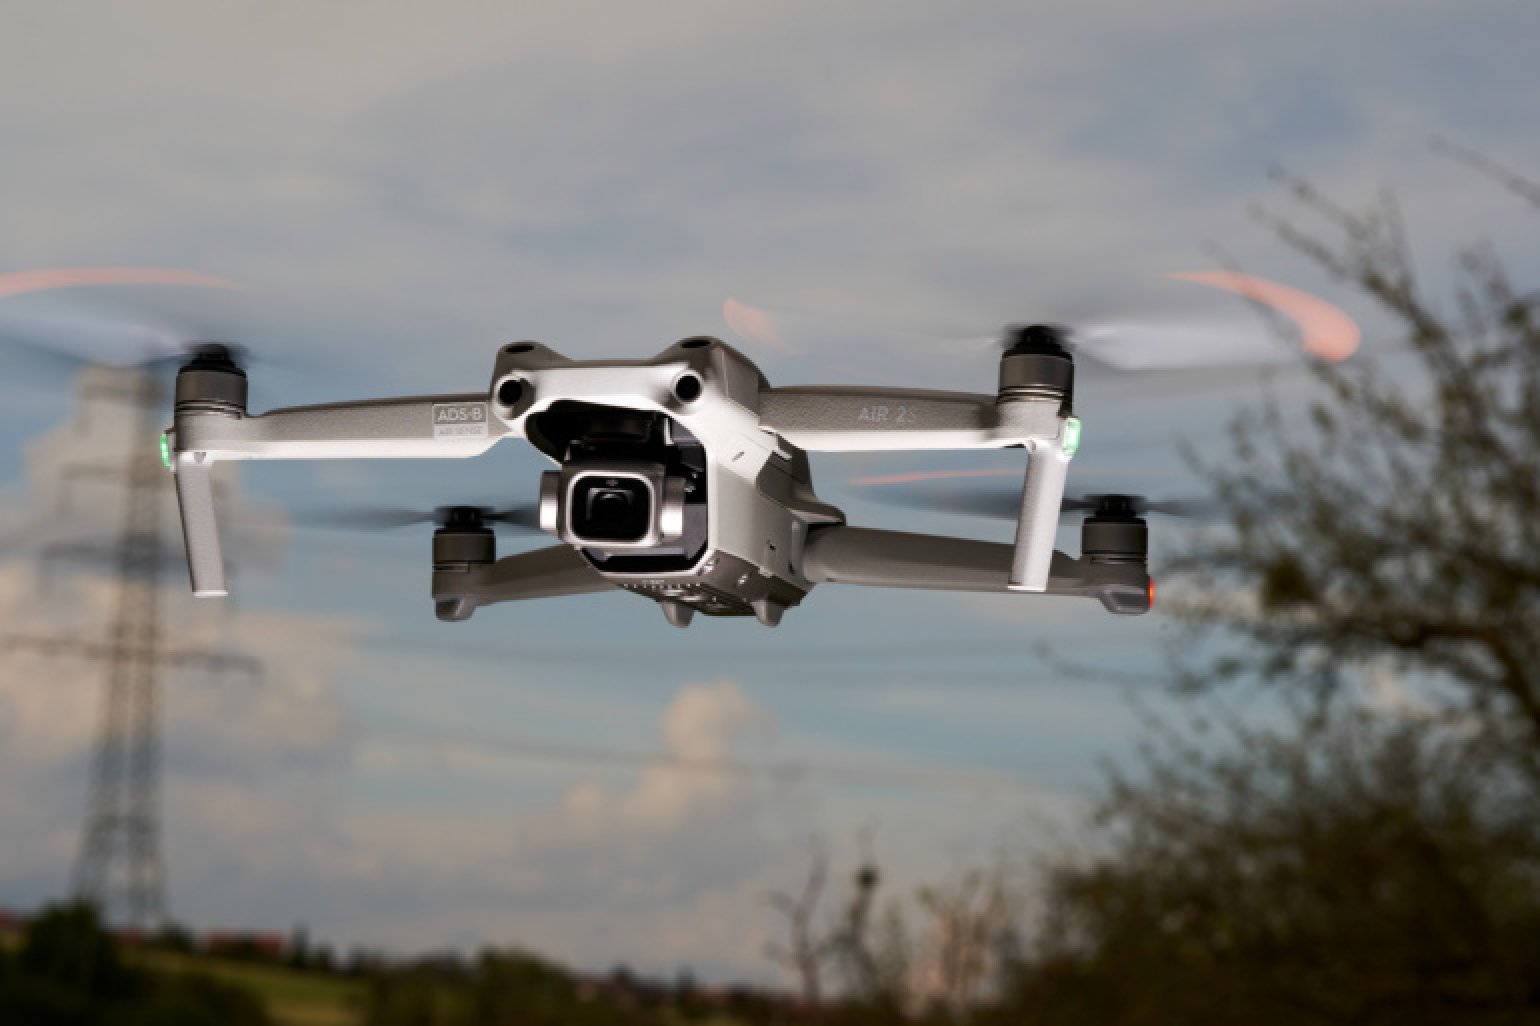 DJI drones will be banned in the US - the House of Representatives of Congress passed the relevant legislation